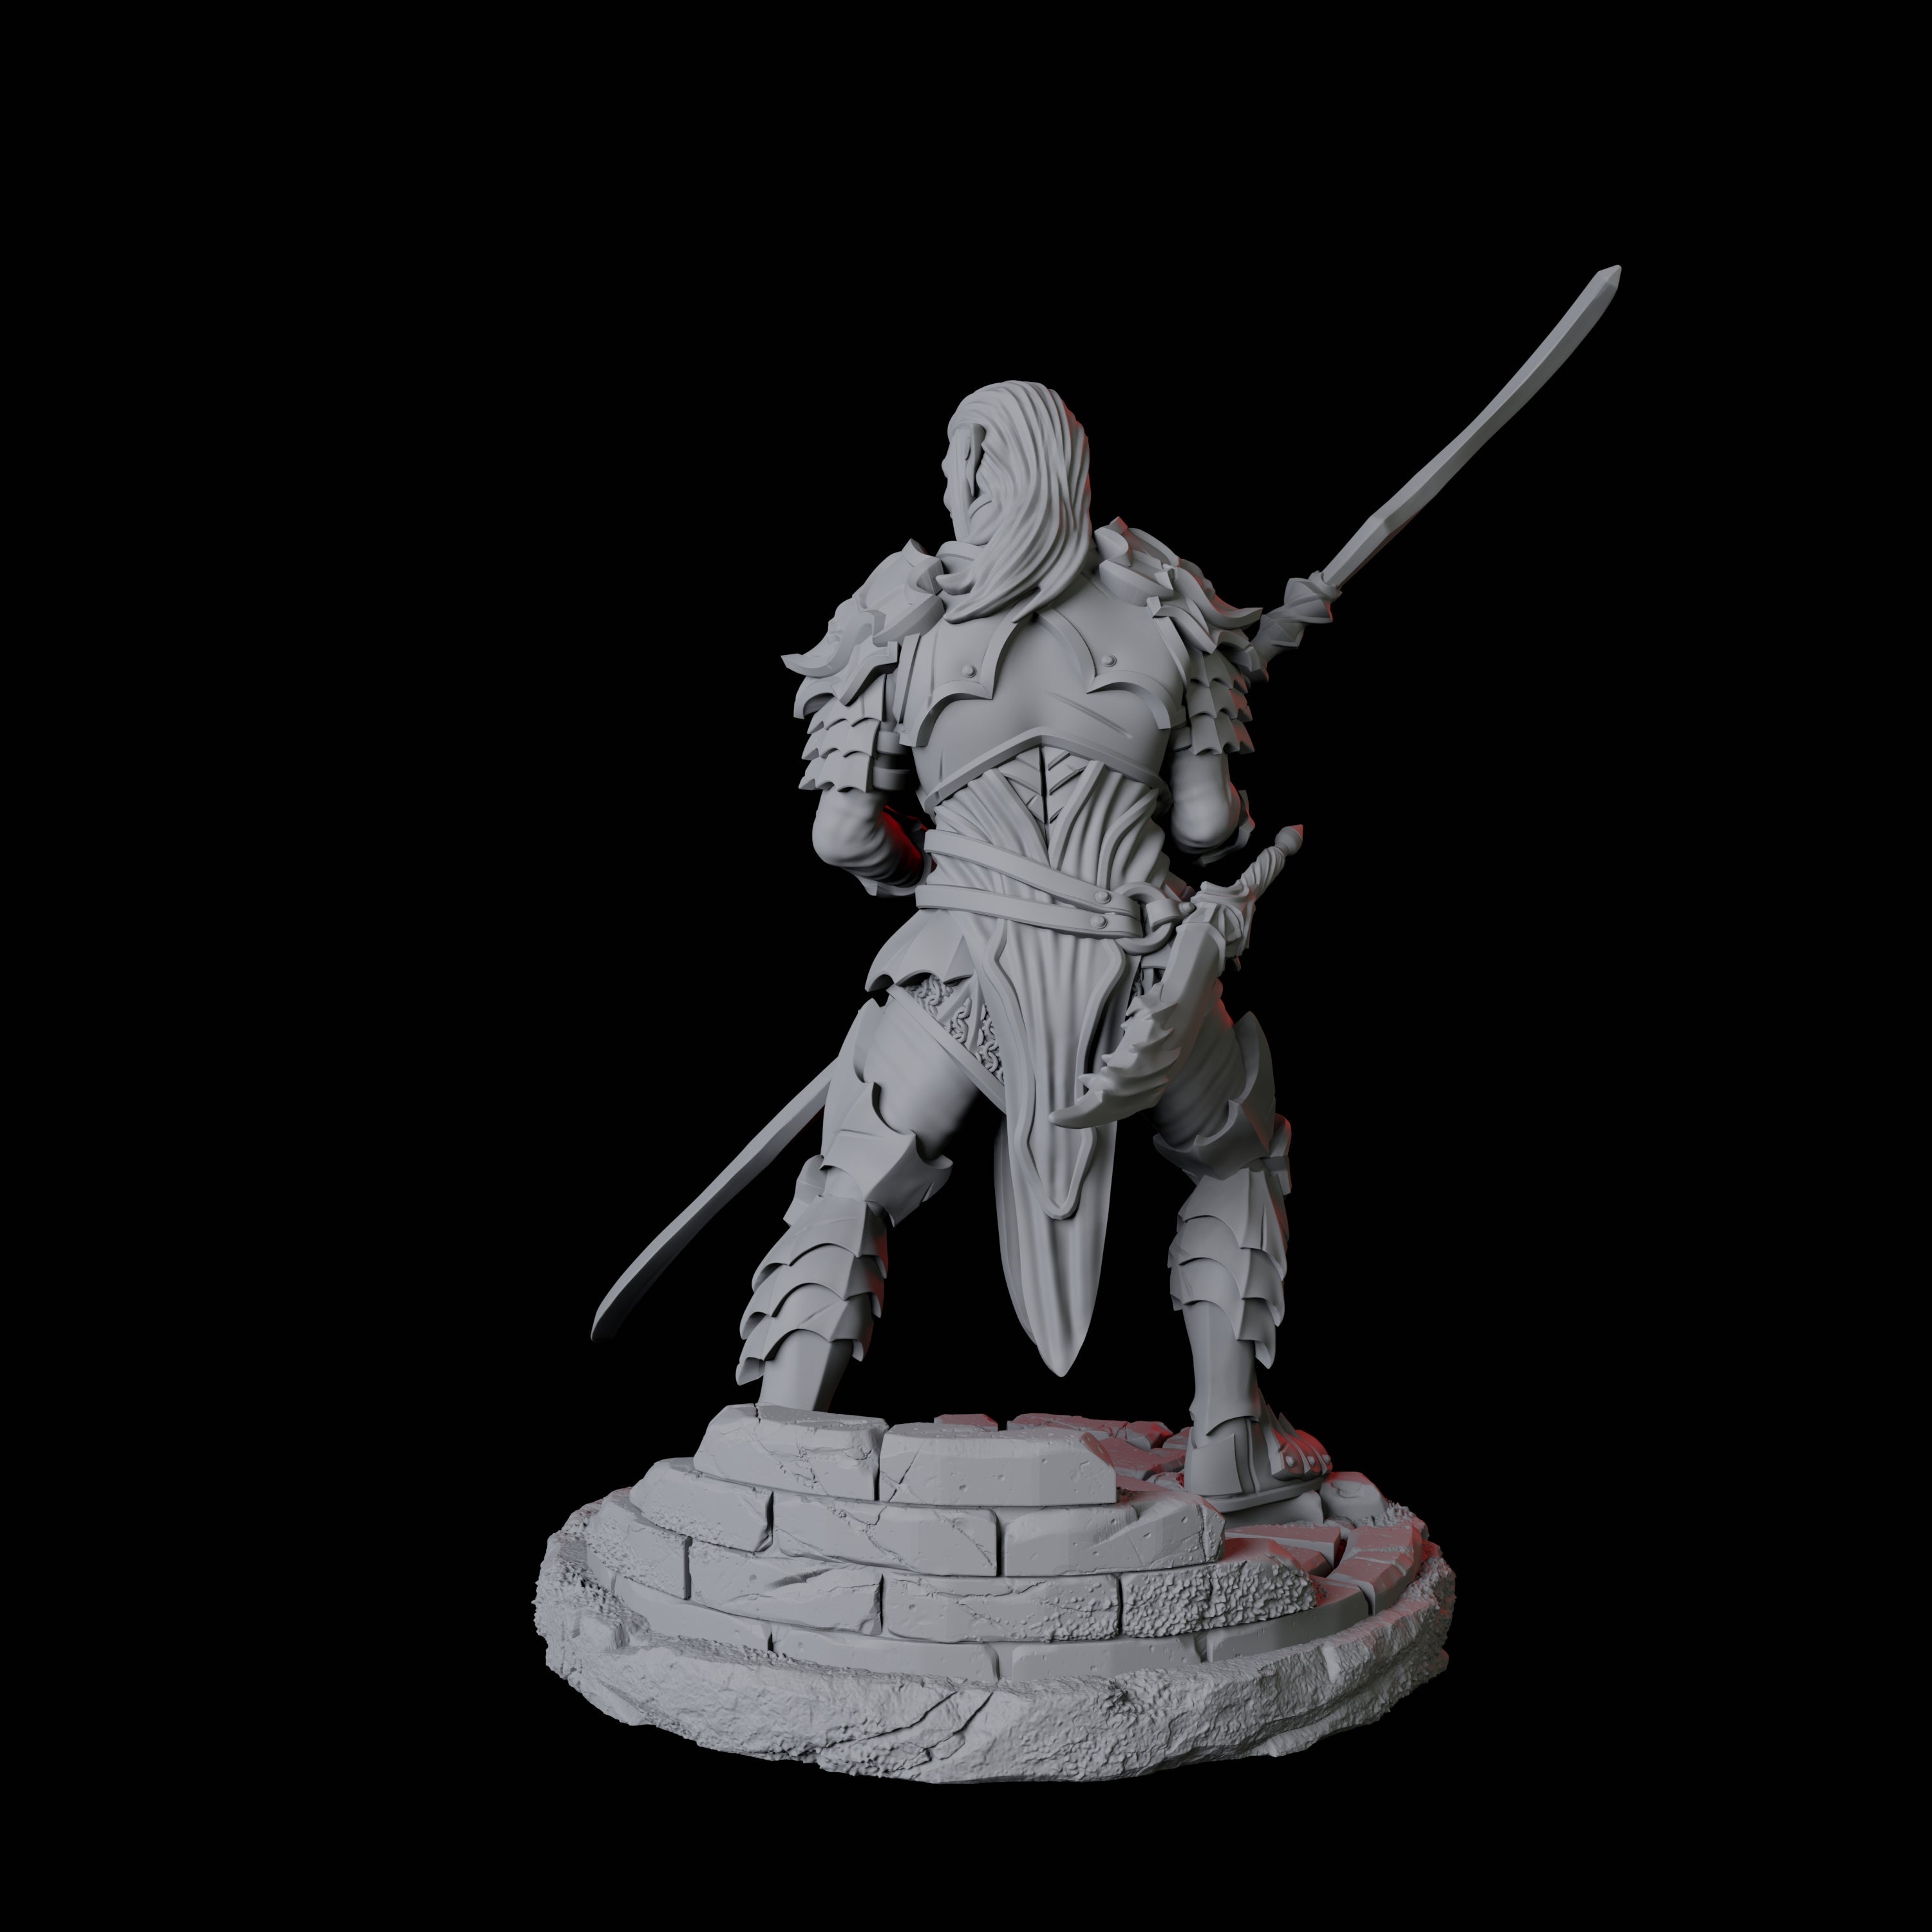 Poised Fighter B Miniature for Dungeons and Dragons, Pathfinder or other TTRPGs